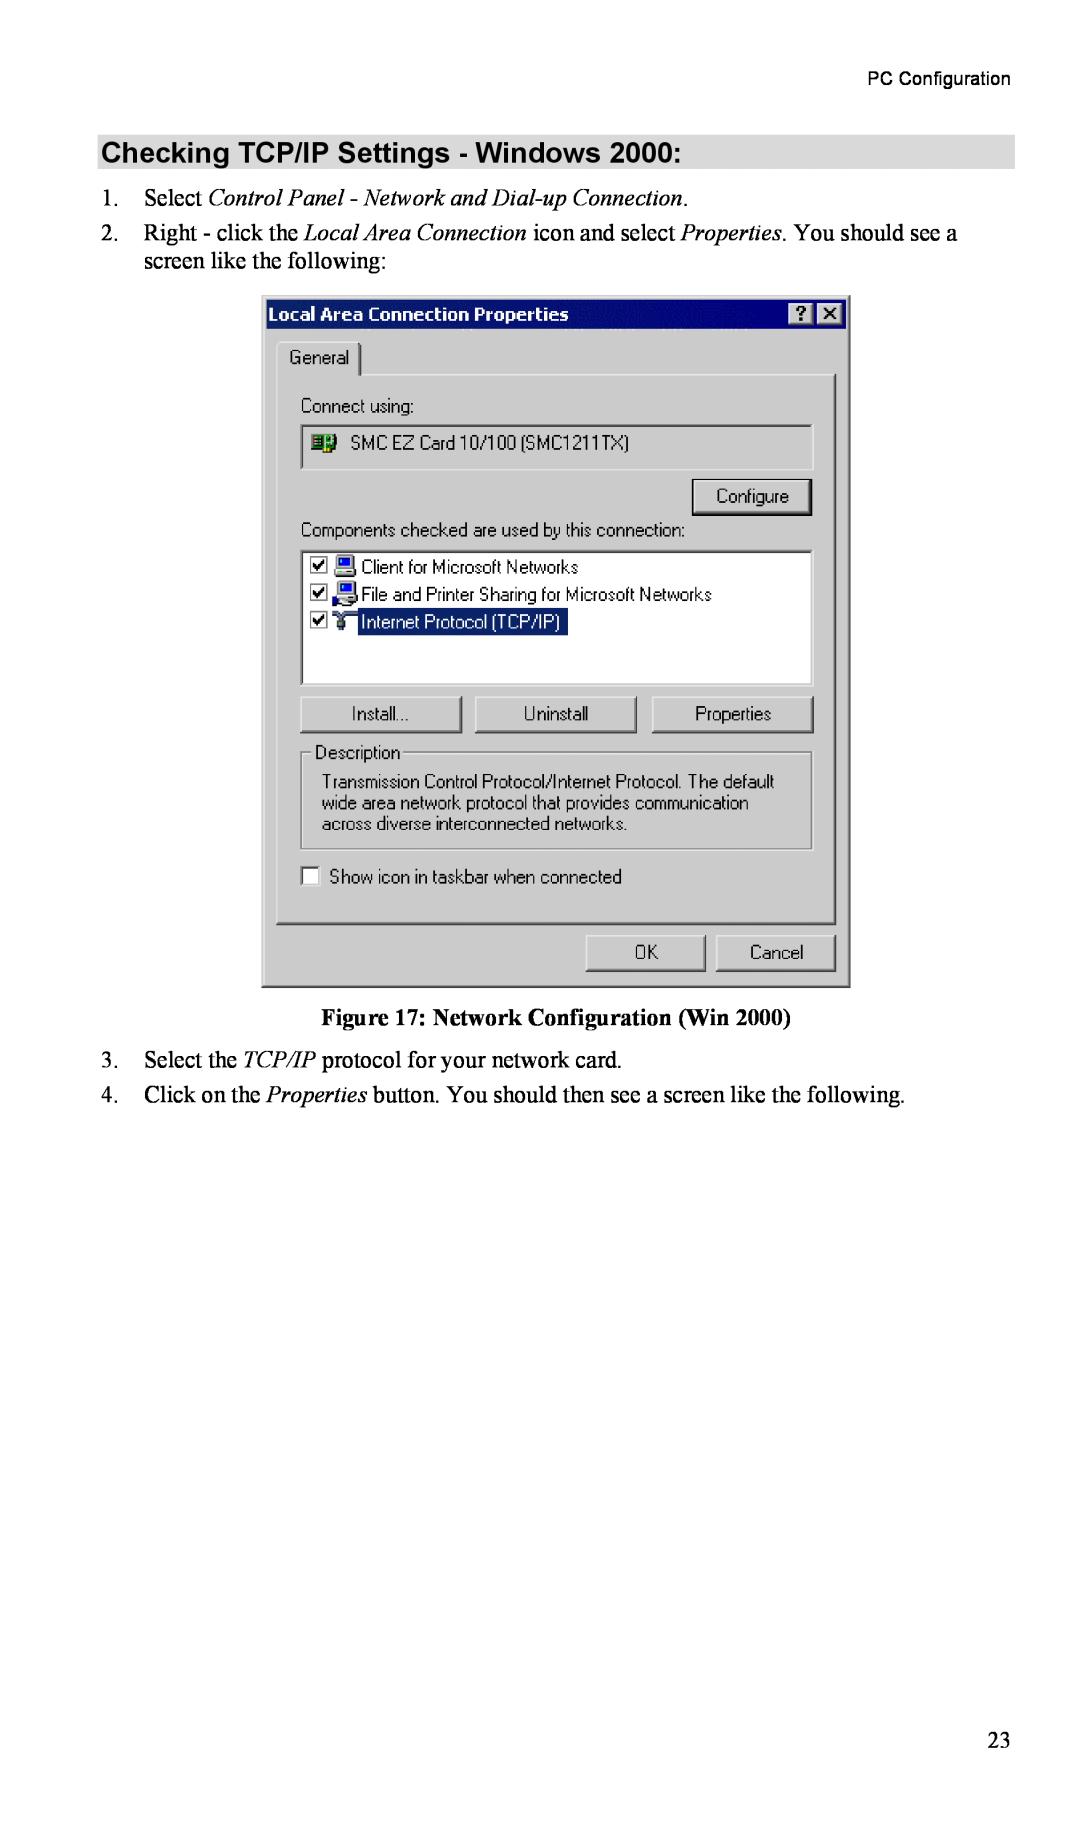 TRENDnet TW100-BRM504 manual Checking TCP/IP Settings - Windows, Network Configuration Win, PC Configuration 